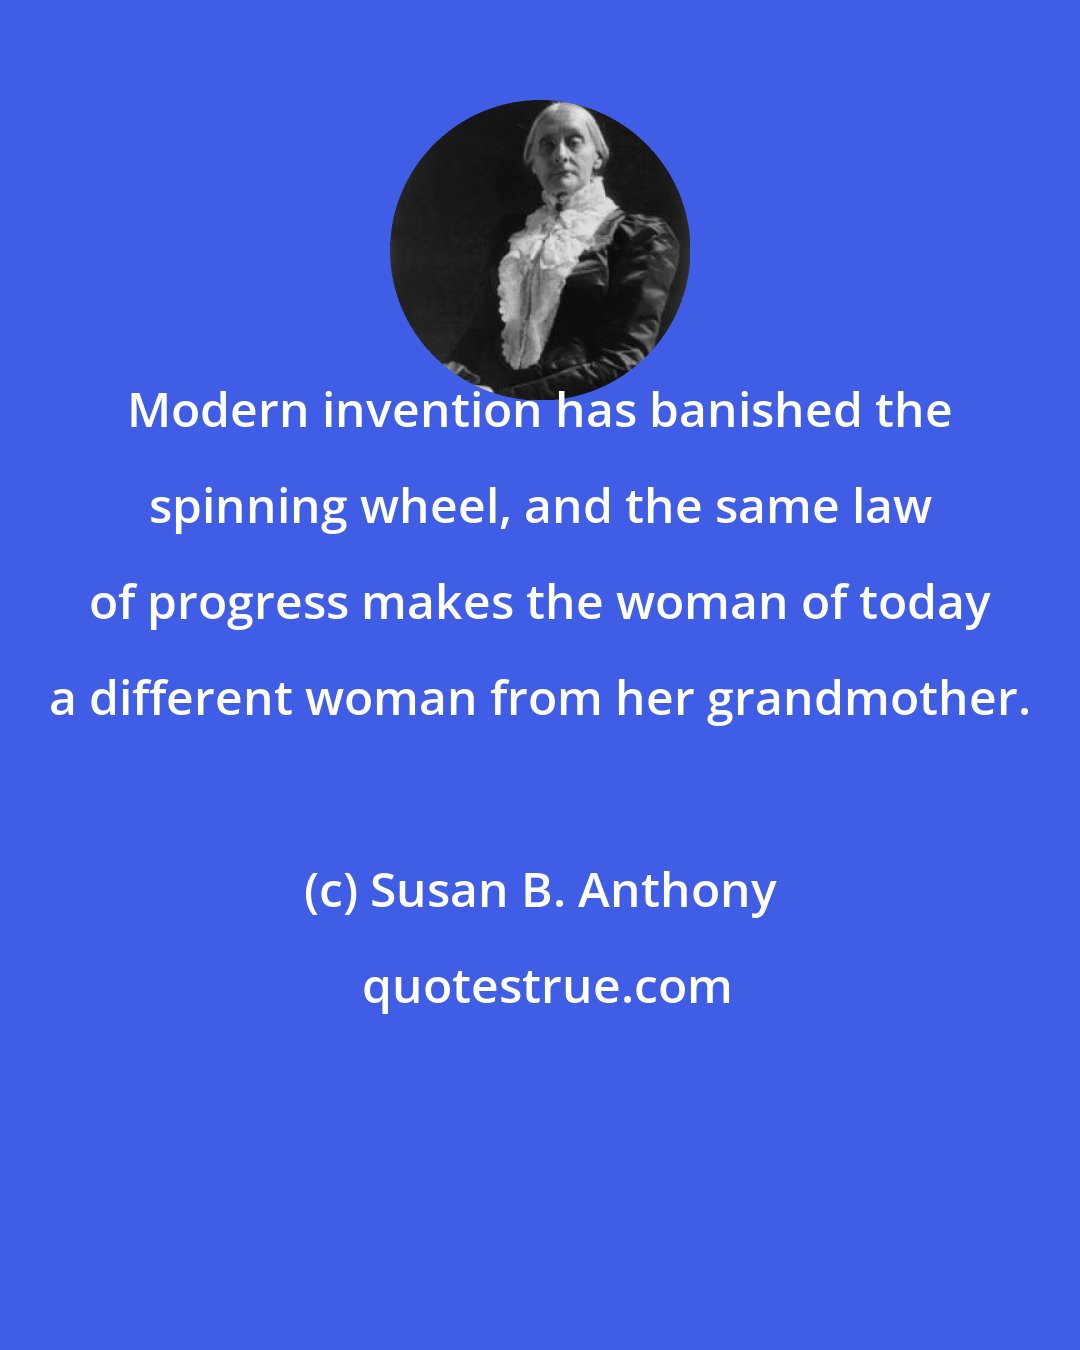 Susan B. Anthony: Modern invention has banished the spinning wheel, and the same law of progress makes the woman of today a different woman from her grandmother.